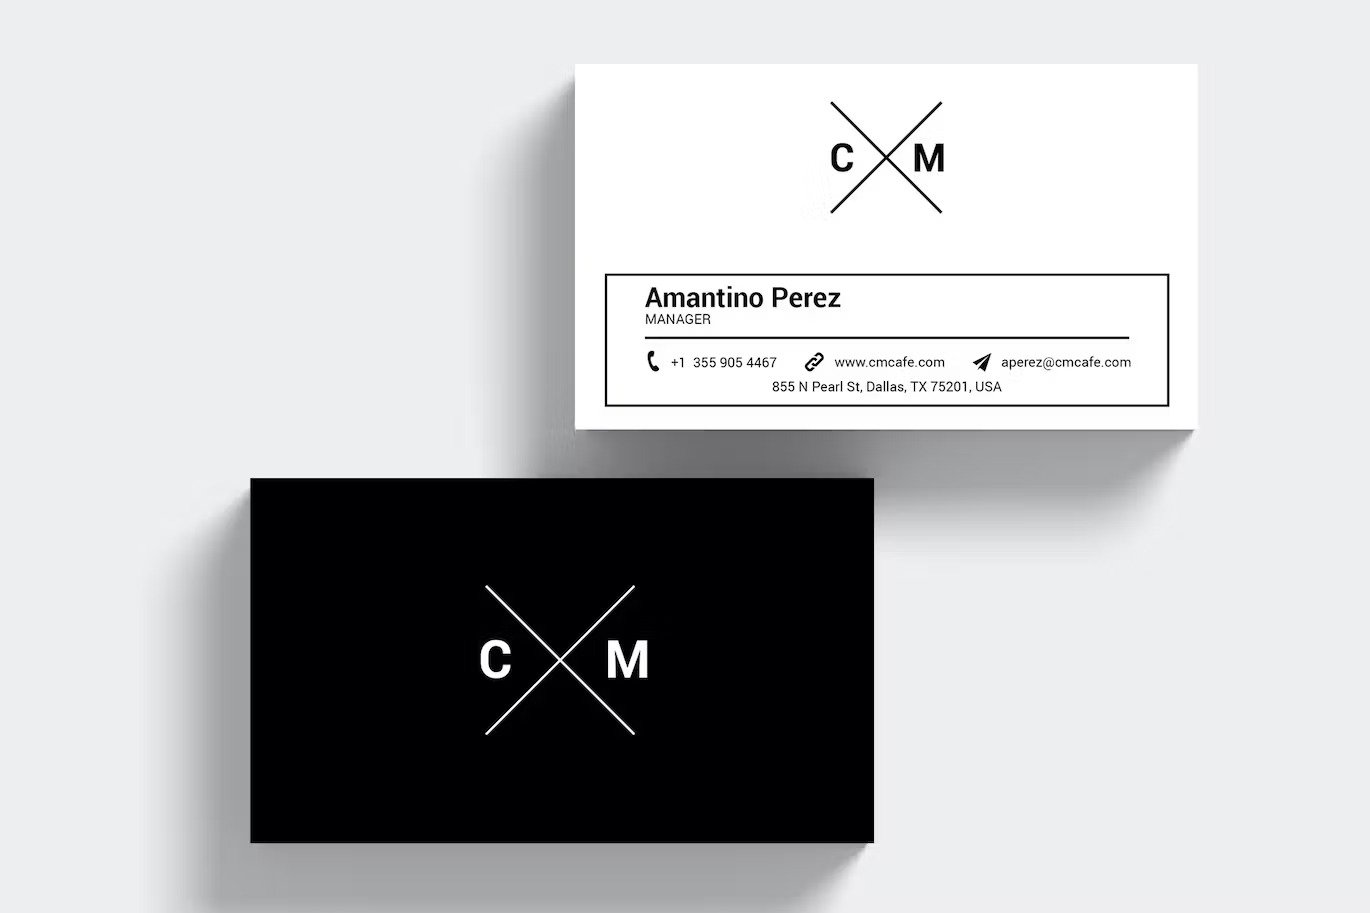 A black and white corporate business card template